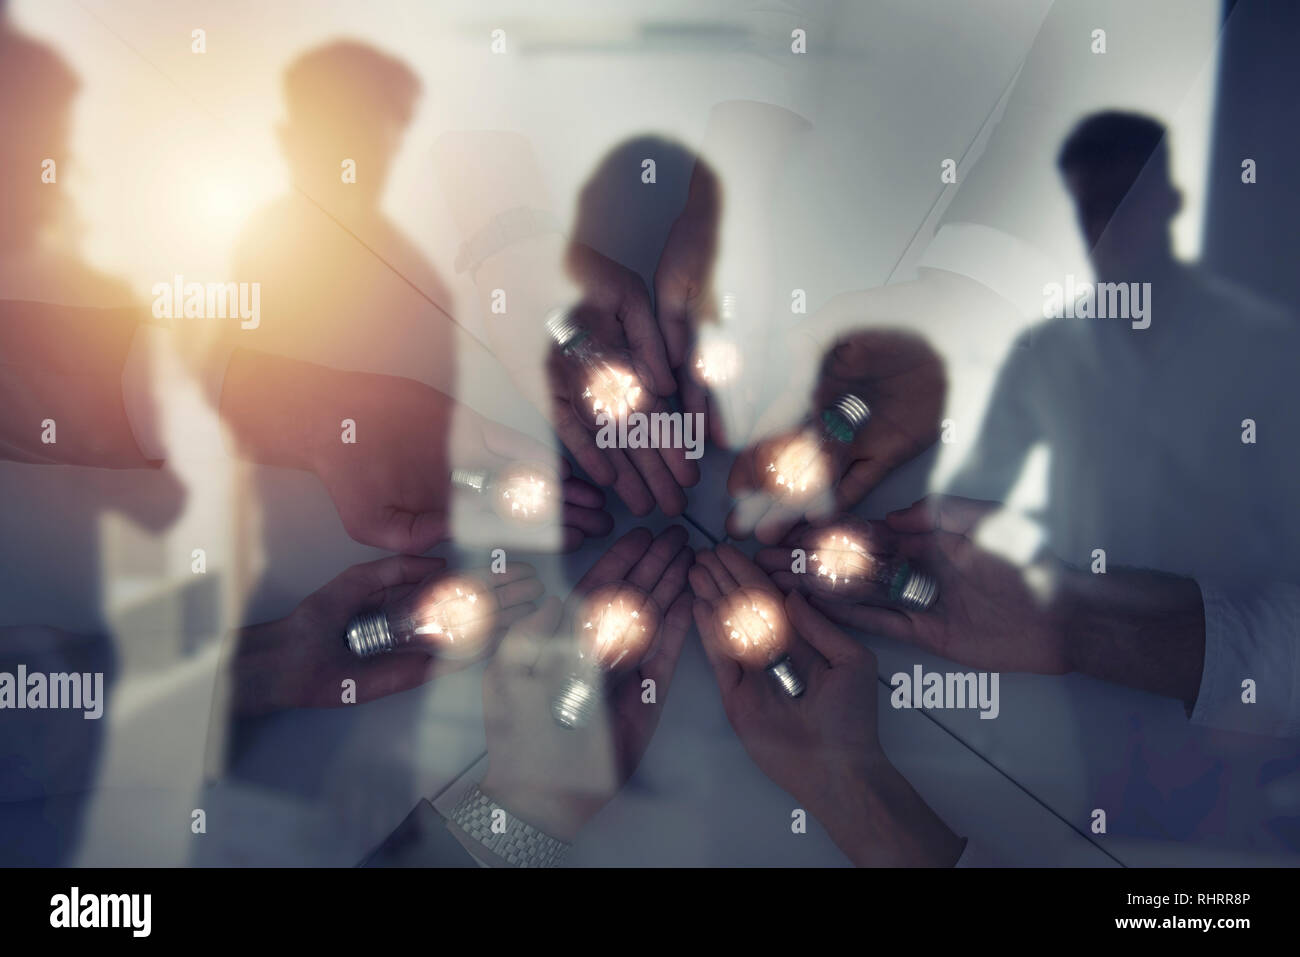 Teamwork and brainstorming concept with businessmen that share an idea with a lamp. Concept of startup. Double exposure Stock Photo